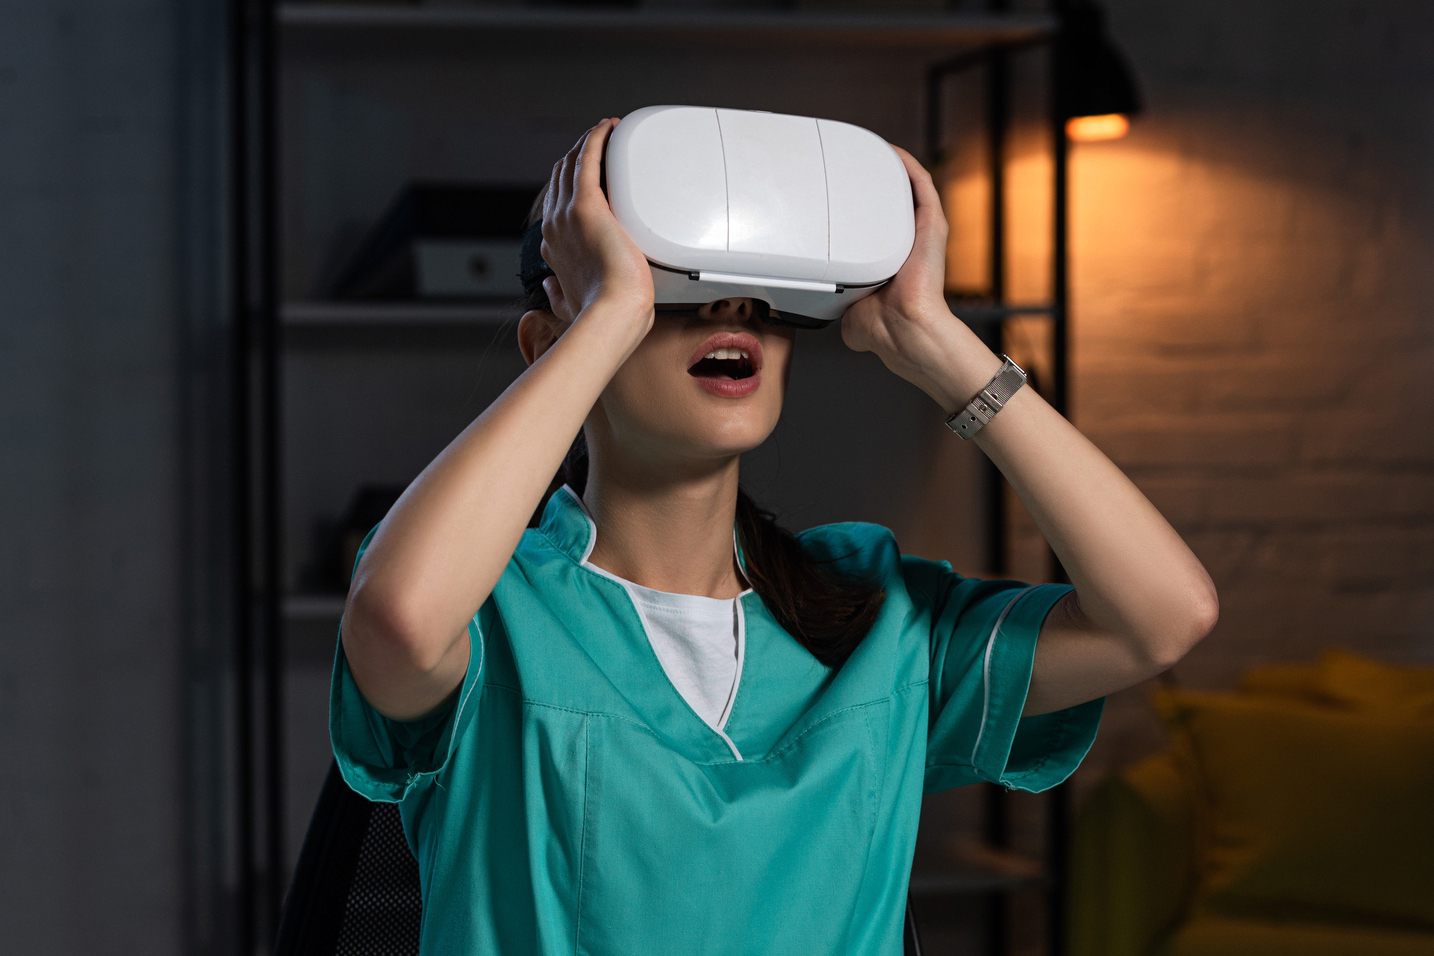 Nursing student uses vrClinicals while wearing virtual reality headset